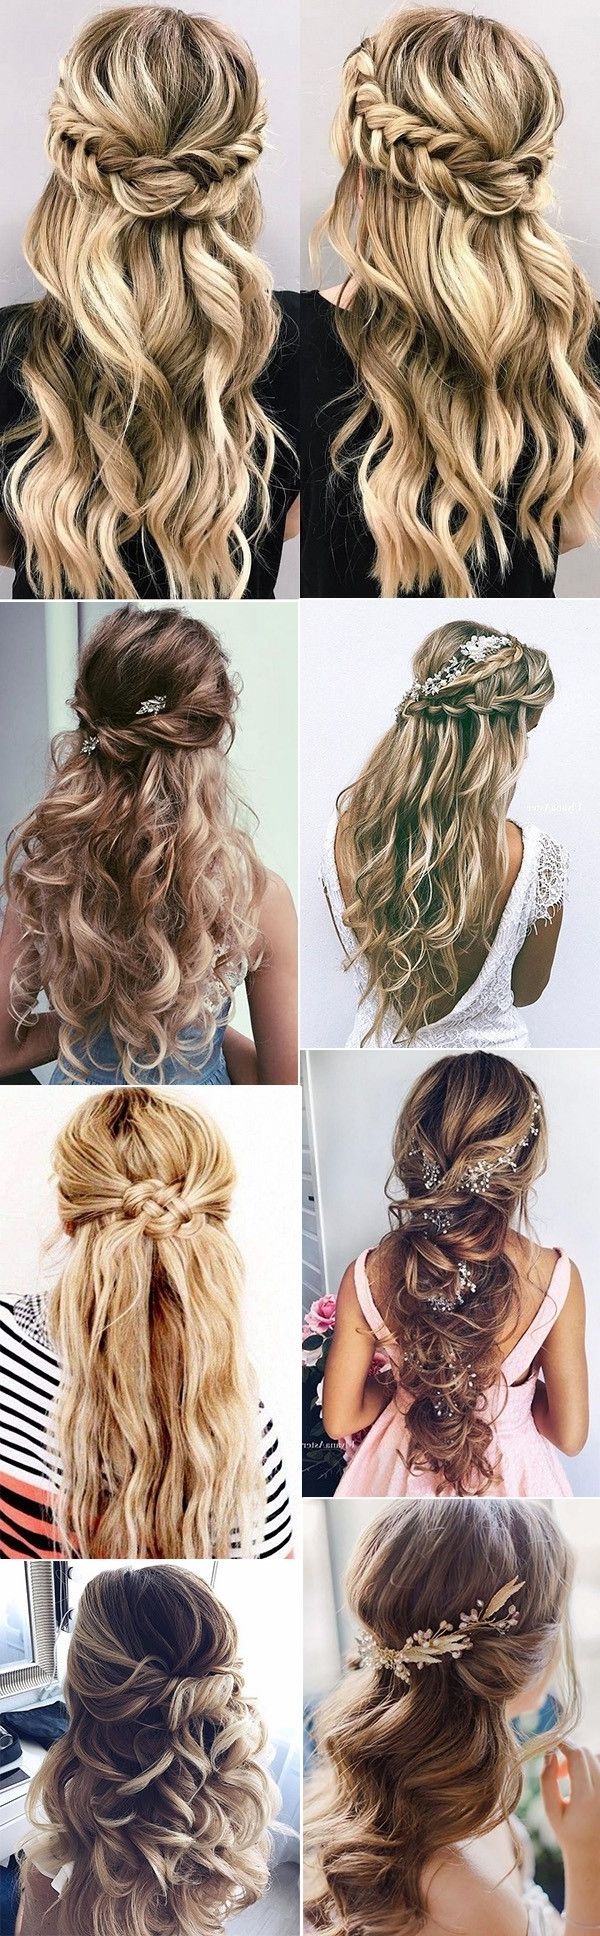 15 Chic Half Up Half Down Wedding Hairstyles For Long Hair In Preferred Half Up Wedding Hairstyles For Long Hair (View 1 of 15)